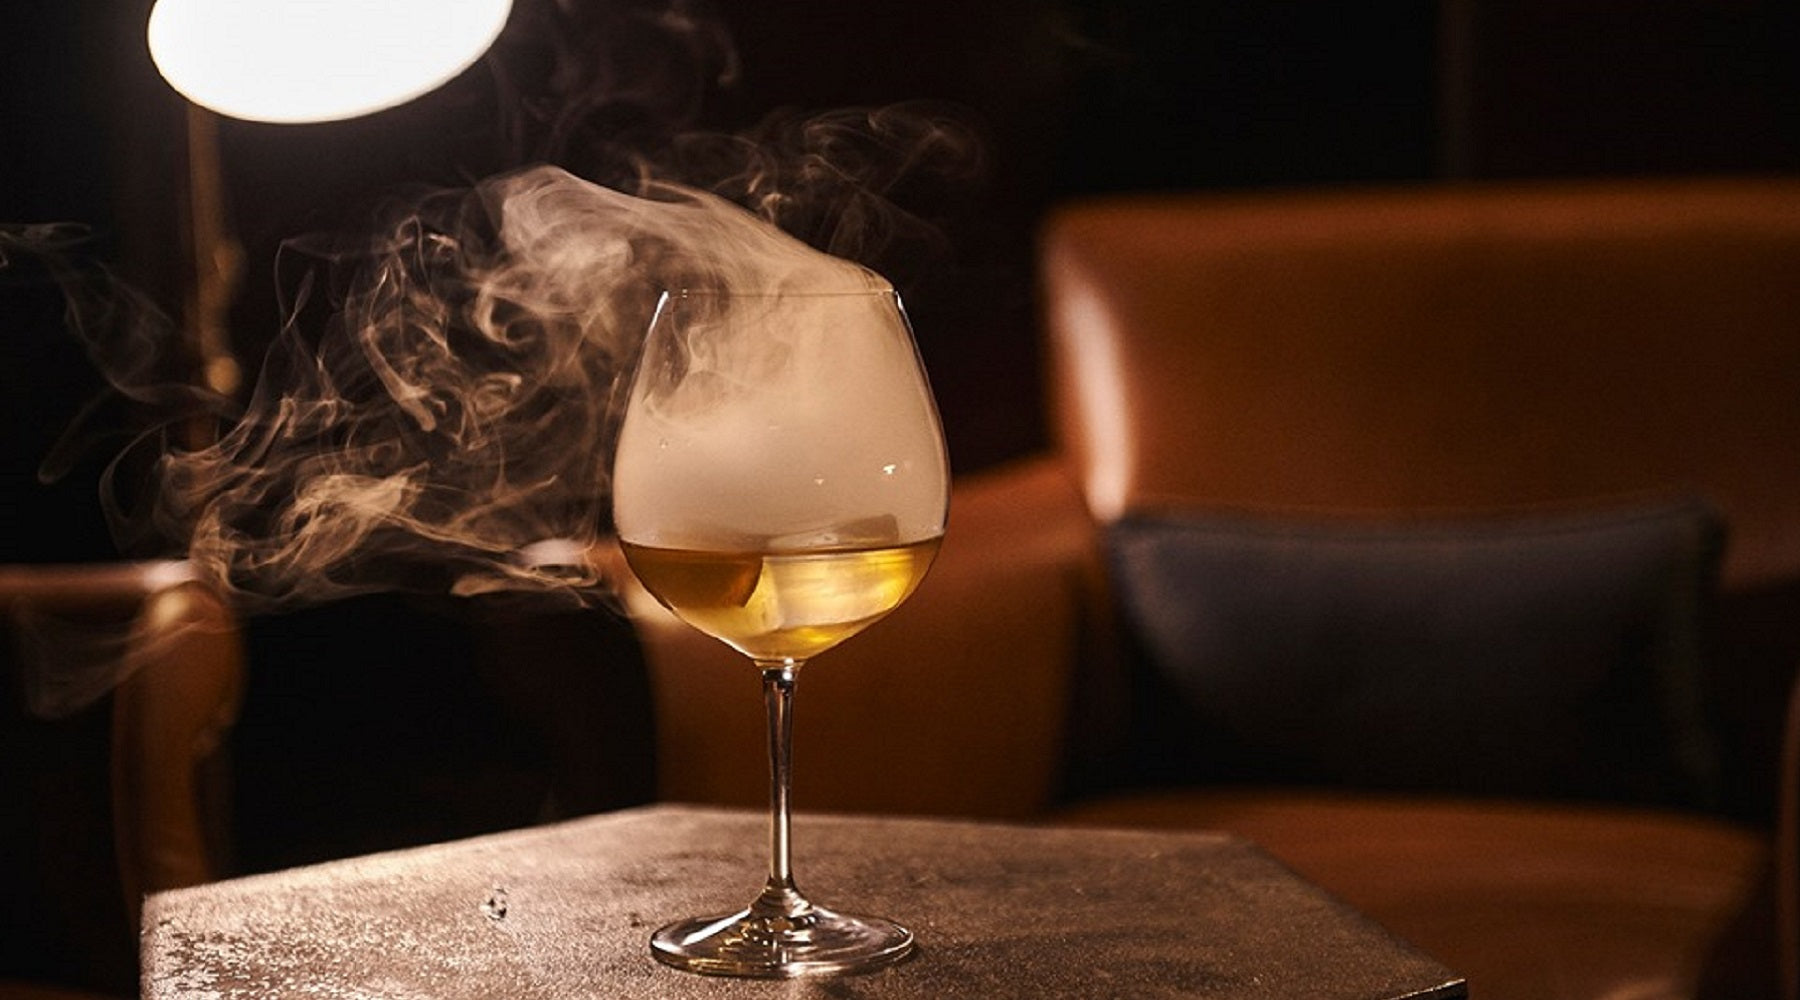 The Best of Cocktail Creativity: Top 8 Picks in Singapore